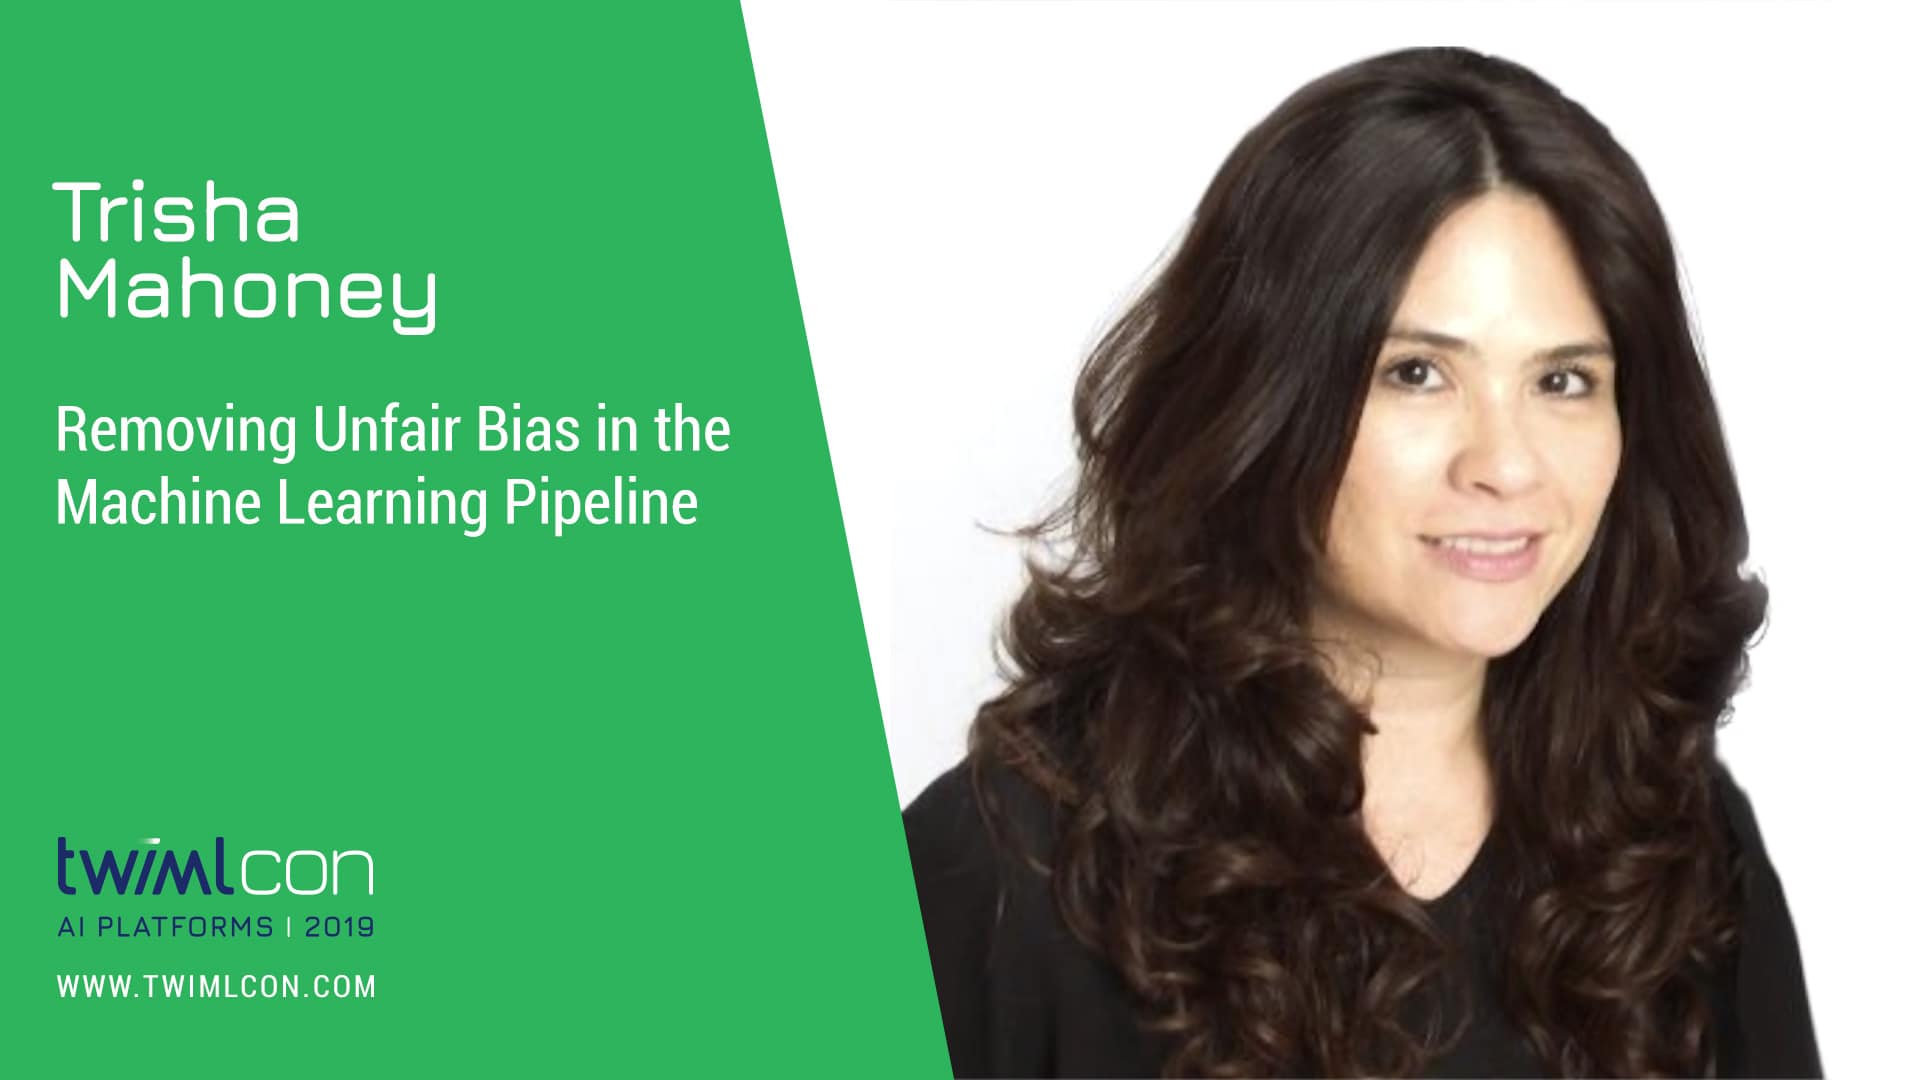 Removing Unfair Bias in the Machine Learning Pipeline